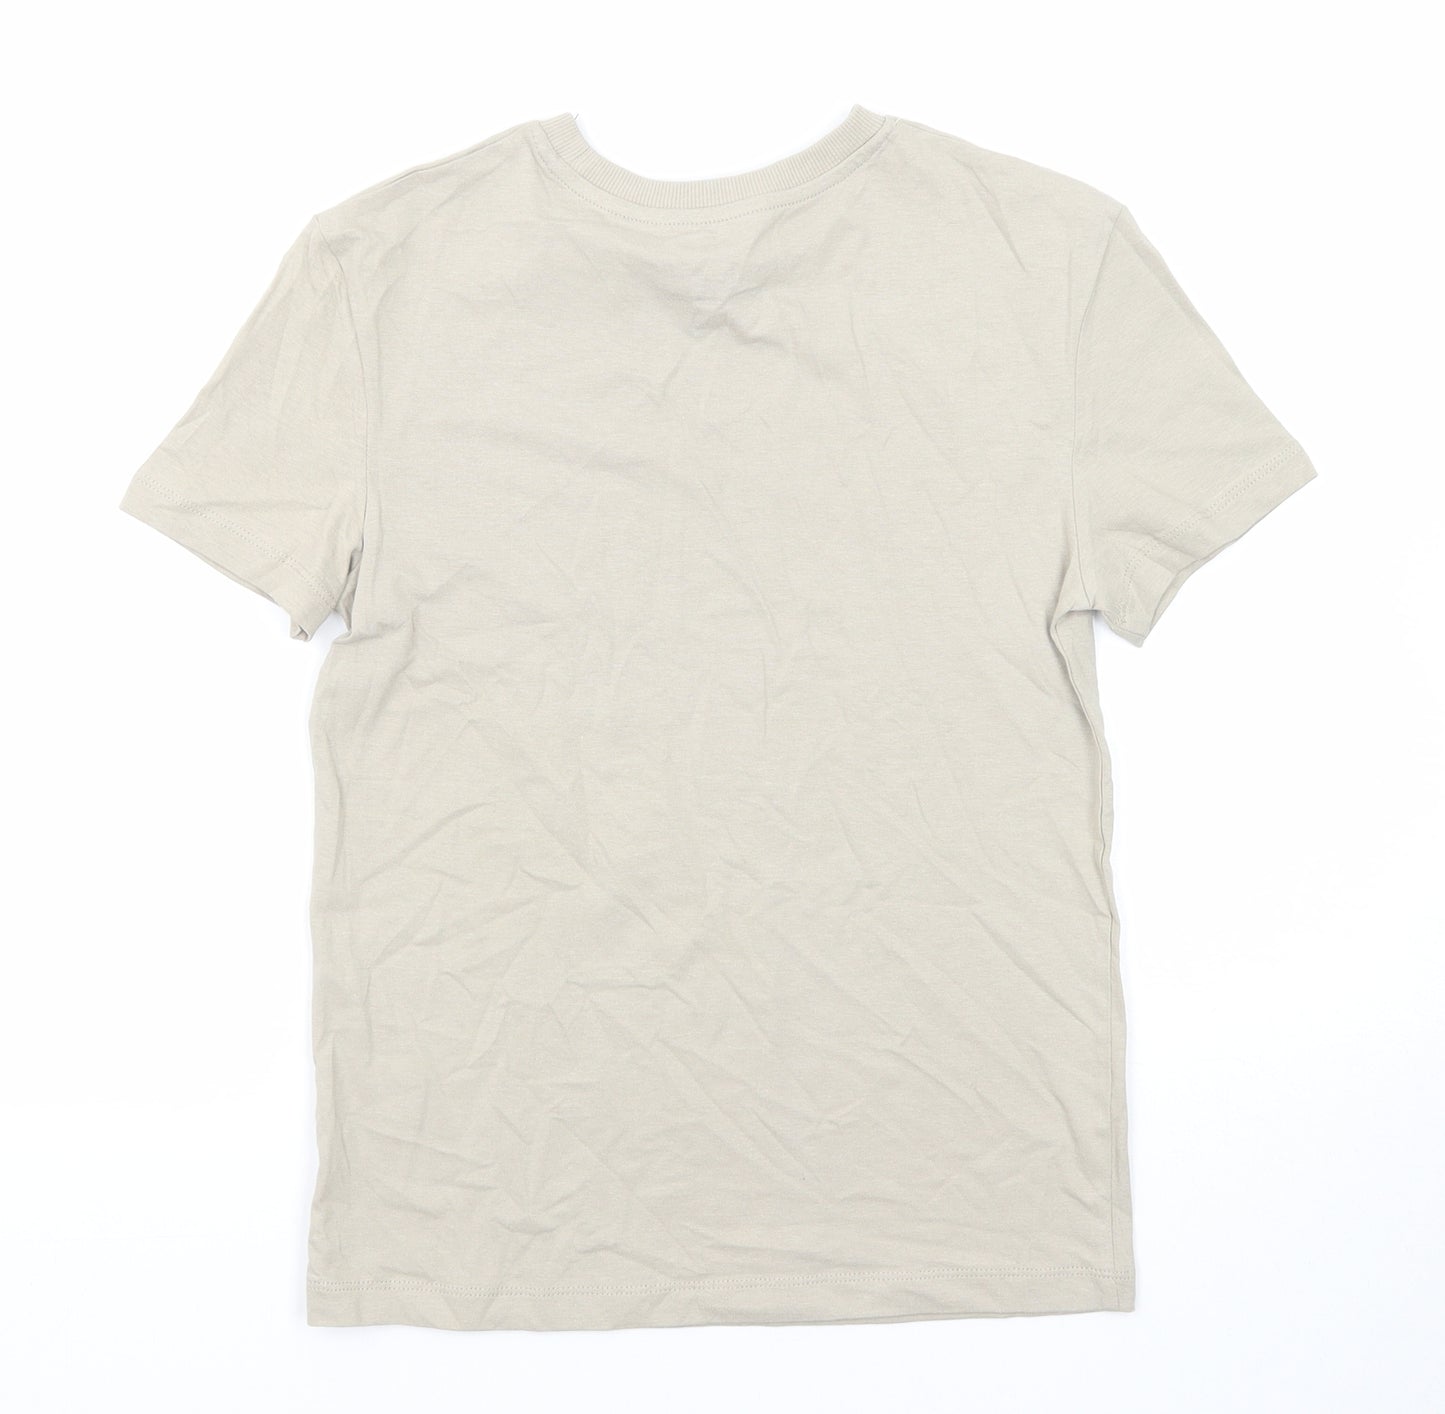 Marks and Spencer Boys Beige Cotton Basic T-Shirt Size 9-10 Years Round Neck Pullover - Gaming